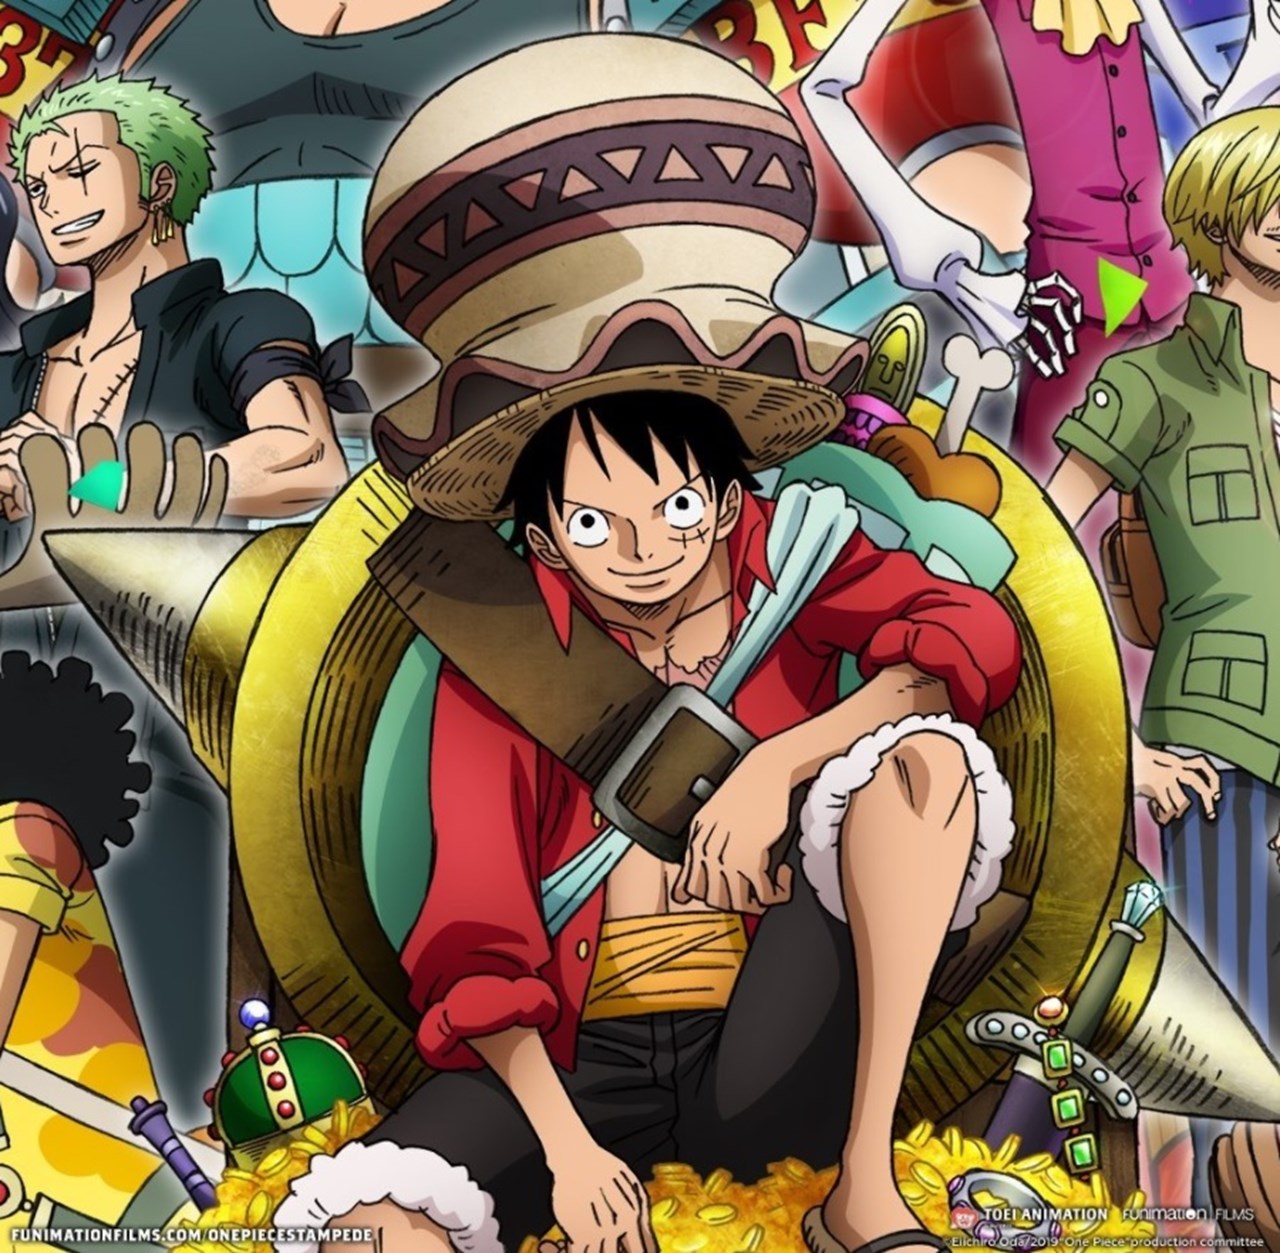 One Piece Chapter 1037 gets an early release date! Know more on plot